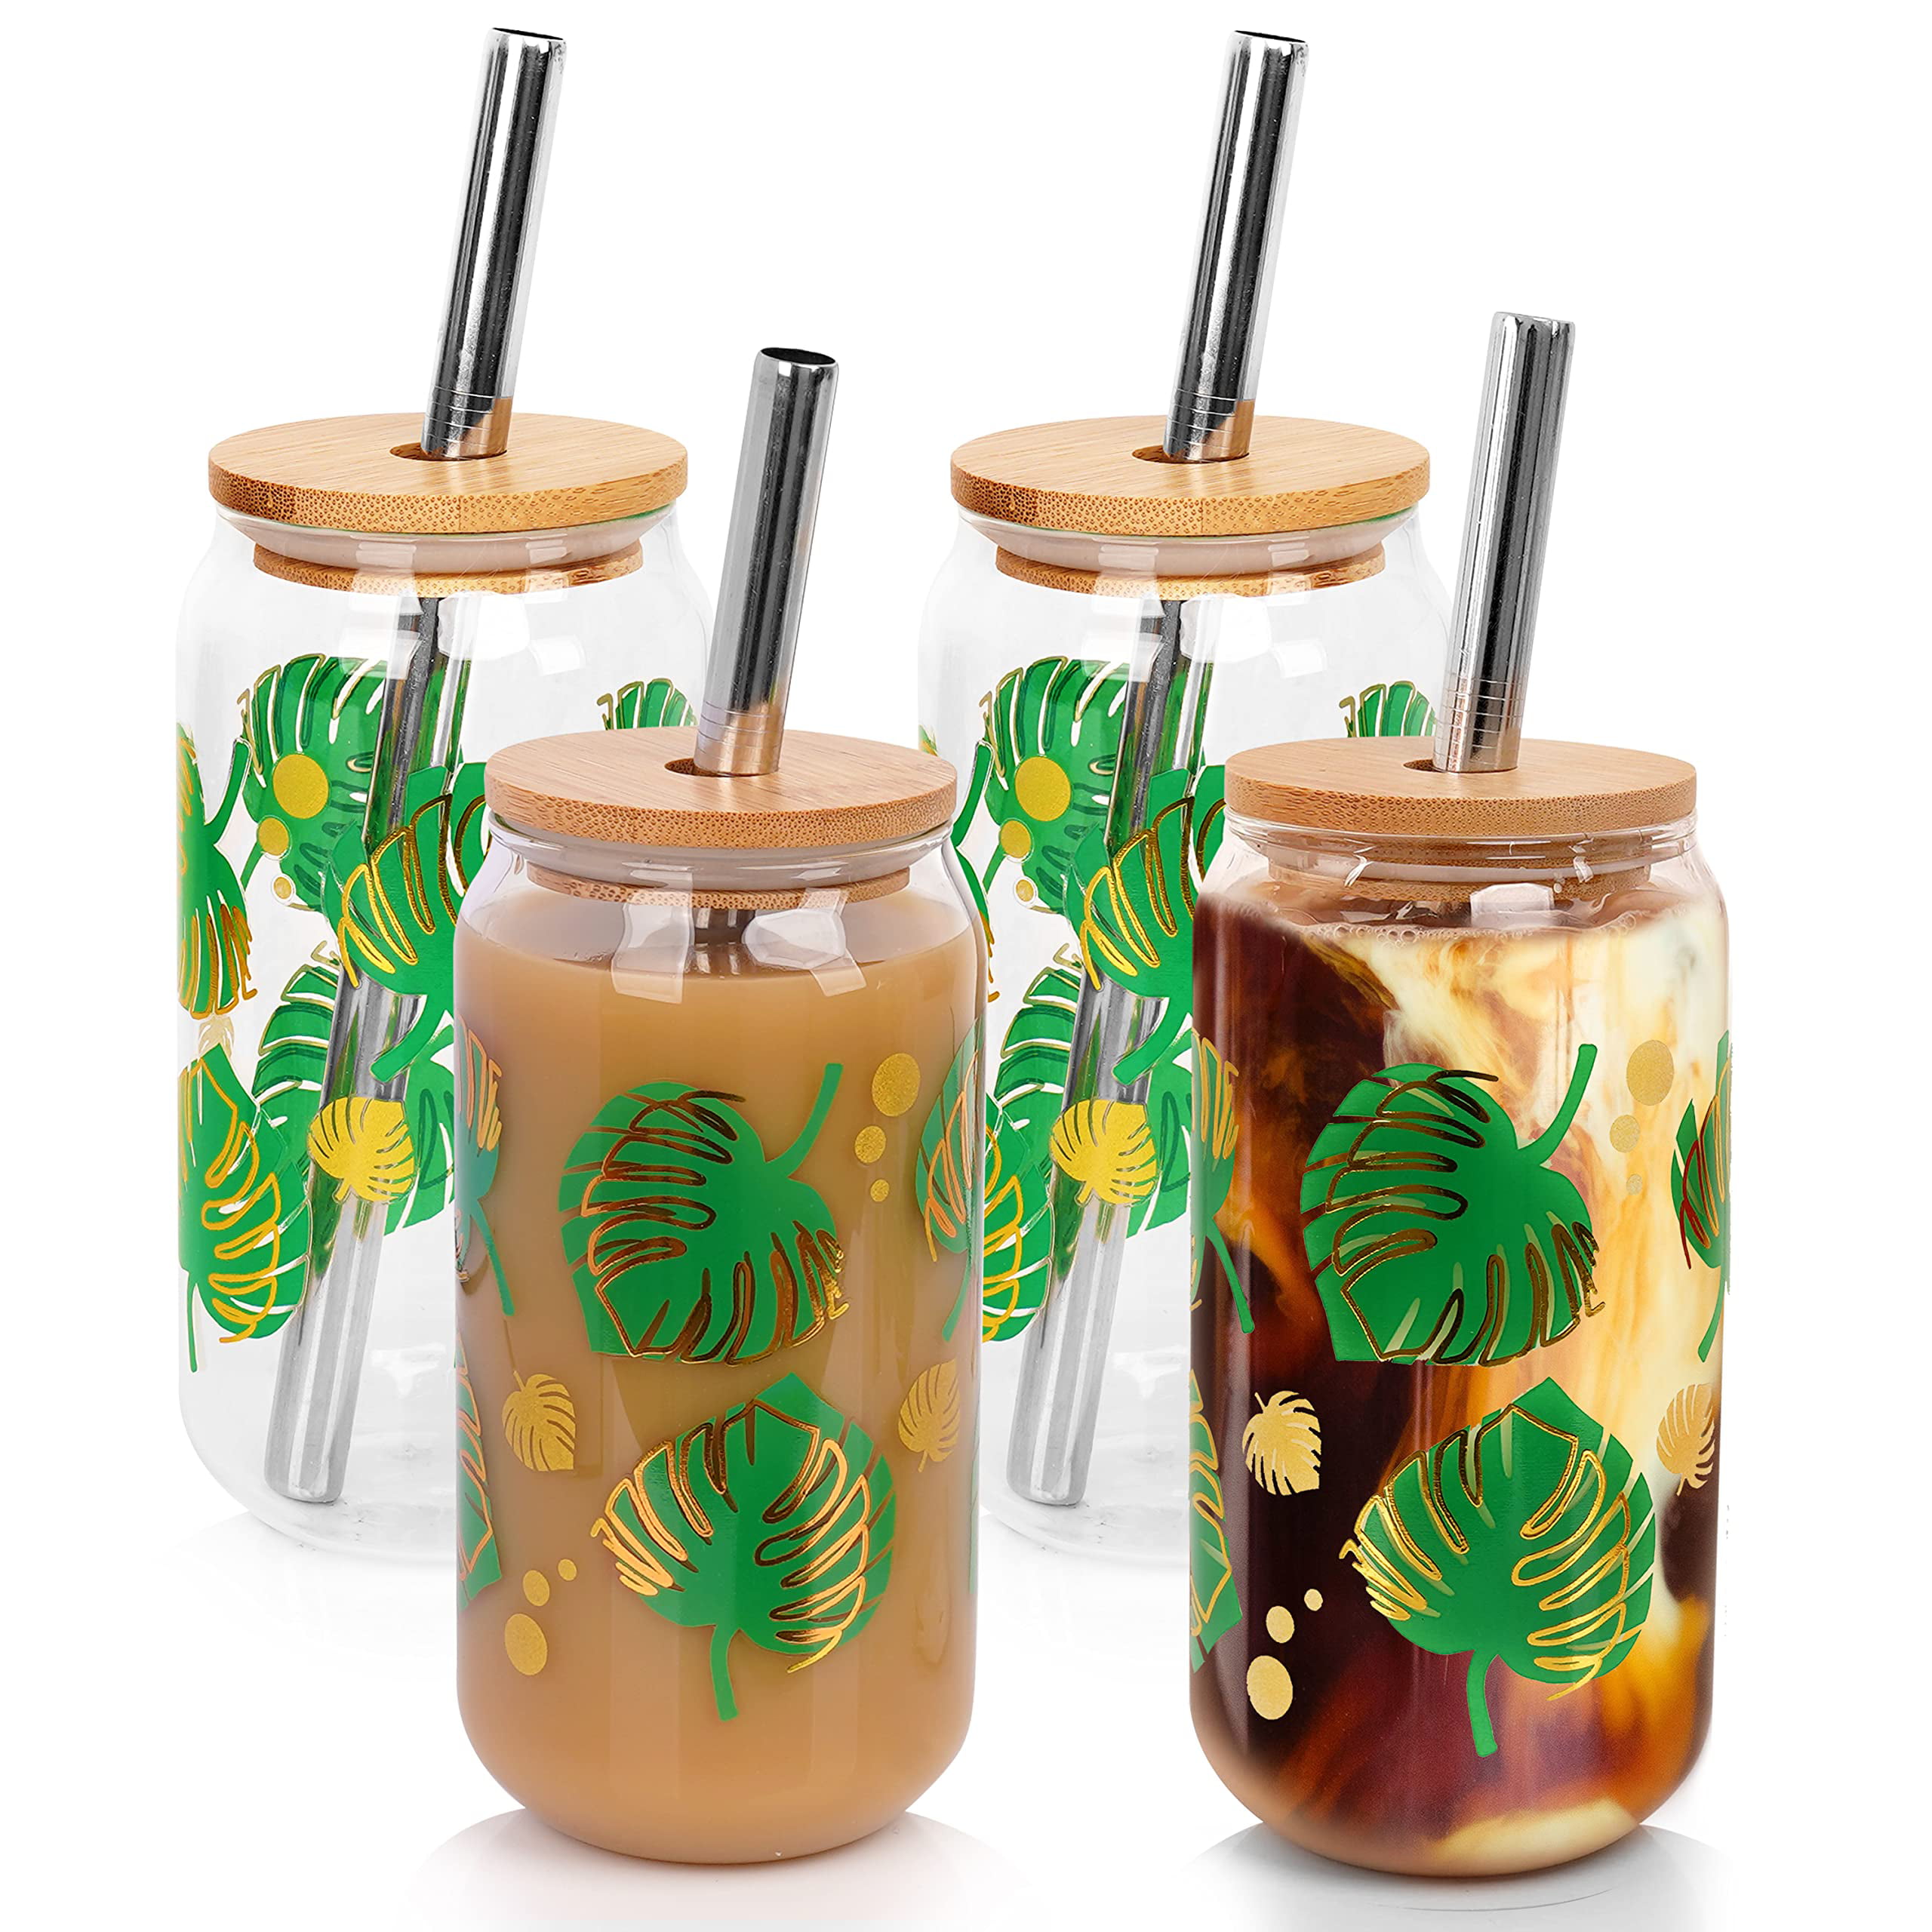 Bamboo Lid and Straw, Beer Can Glass, Iced Coffee Glass Lid, Beer Can Glass  Lid, Bamboo Lid, Iced Coffee Straw, Glass Straw, Plastic Straw 